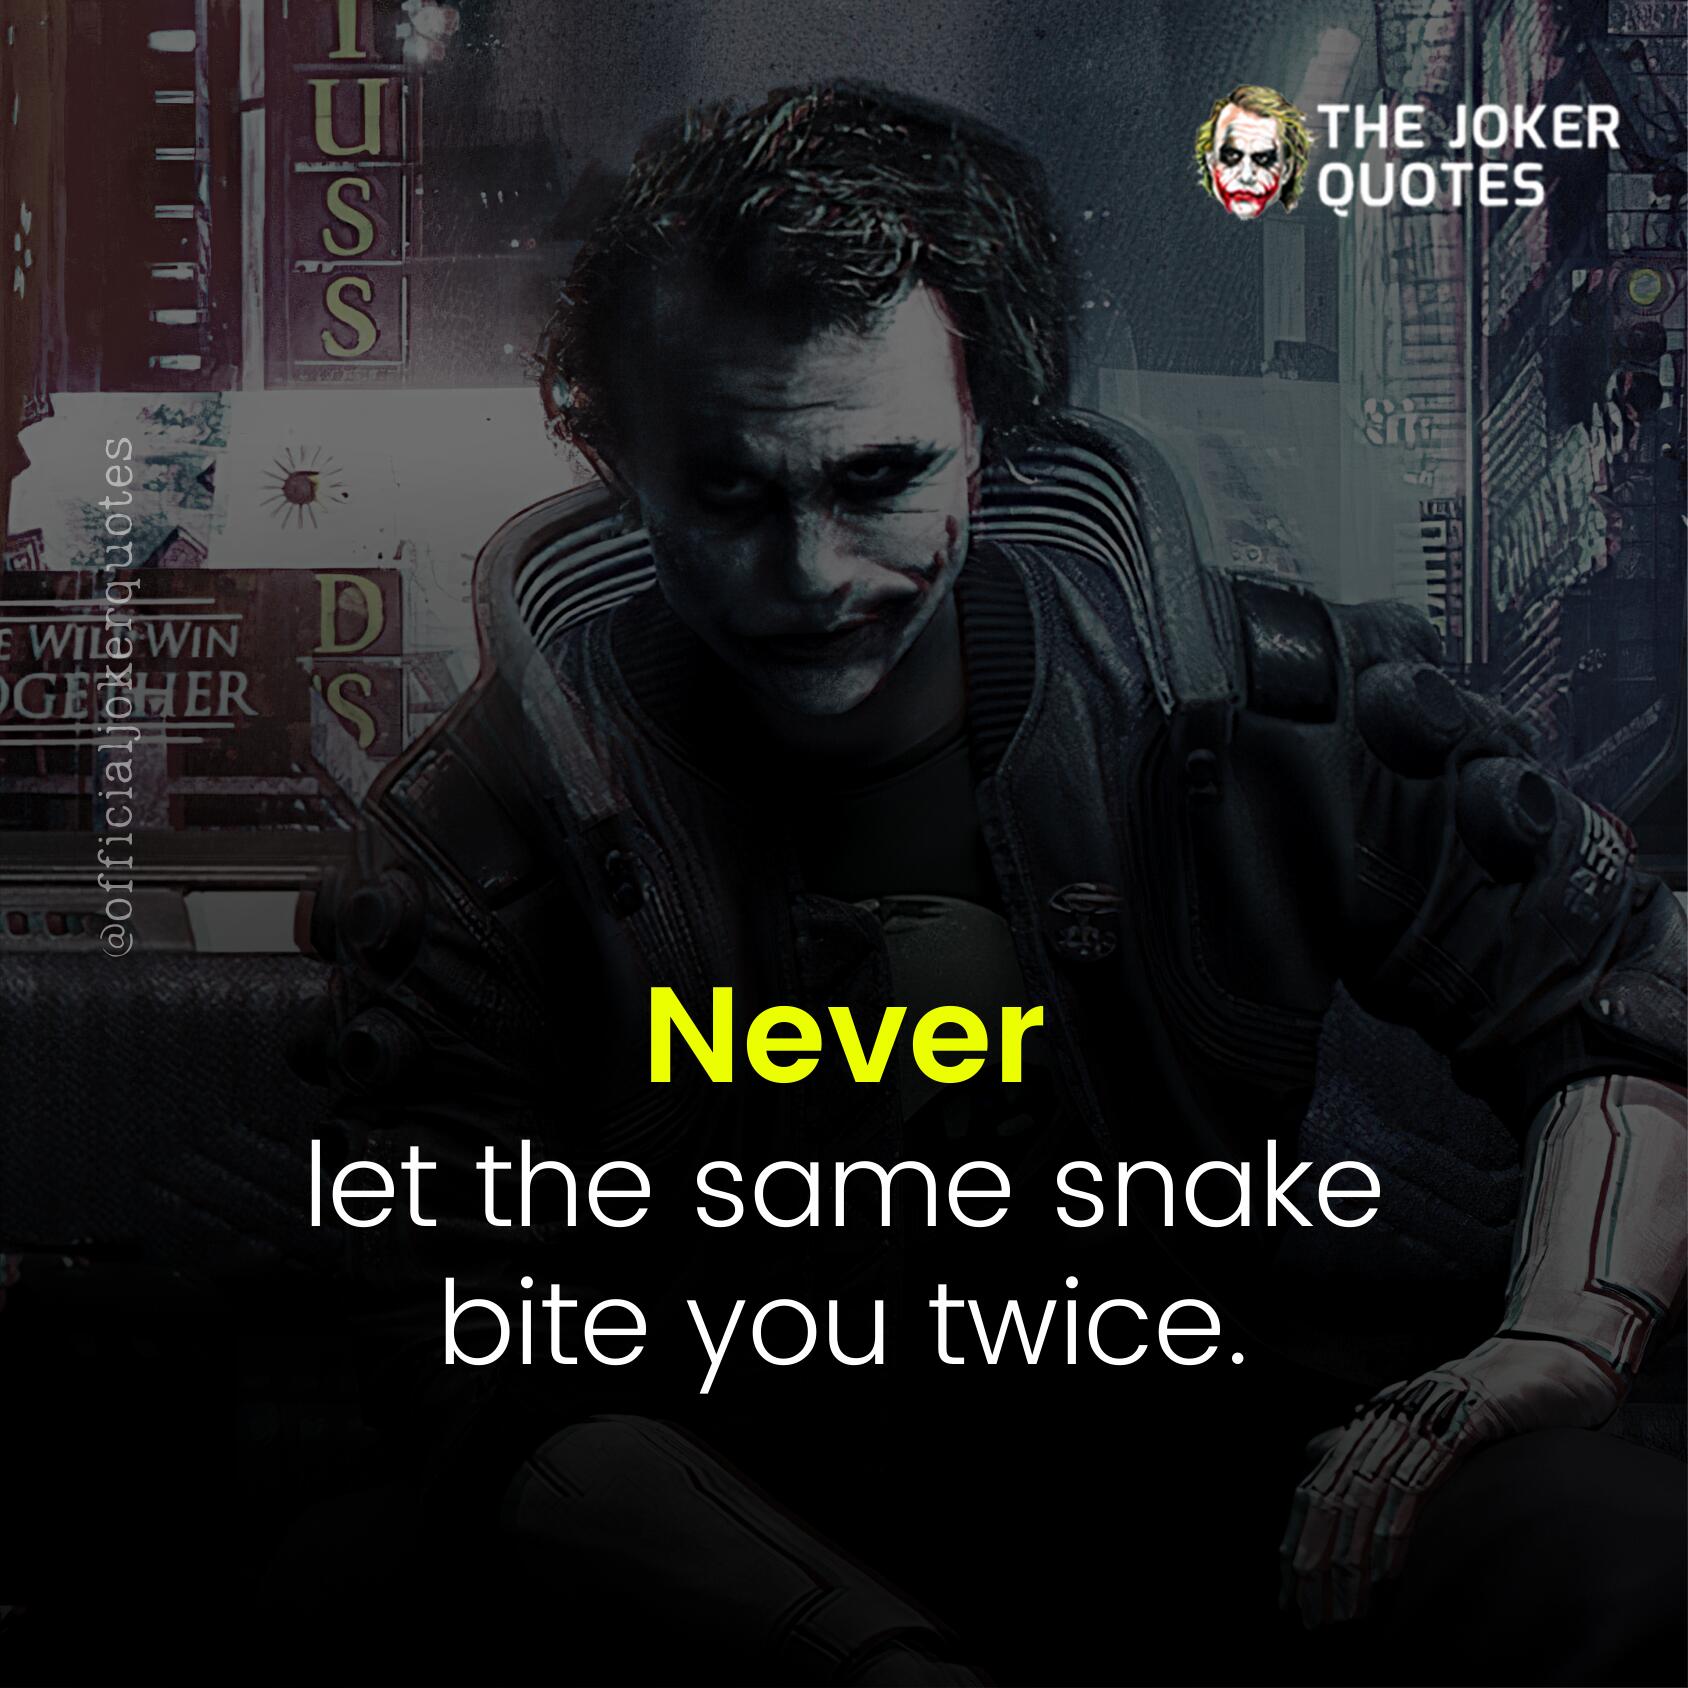 Never let the same snake bite you twice